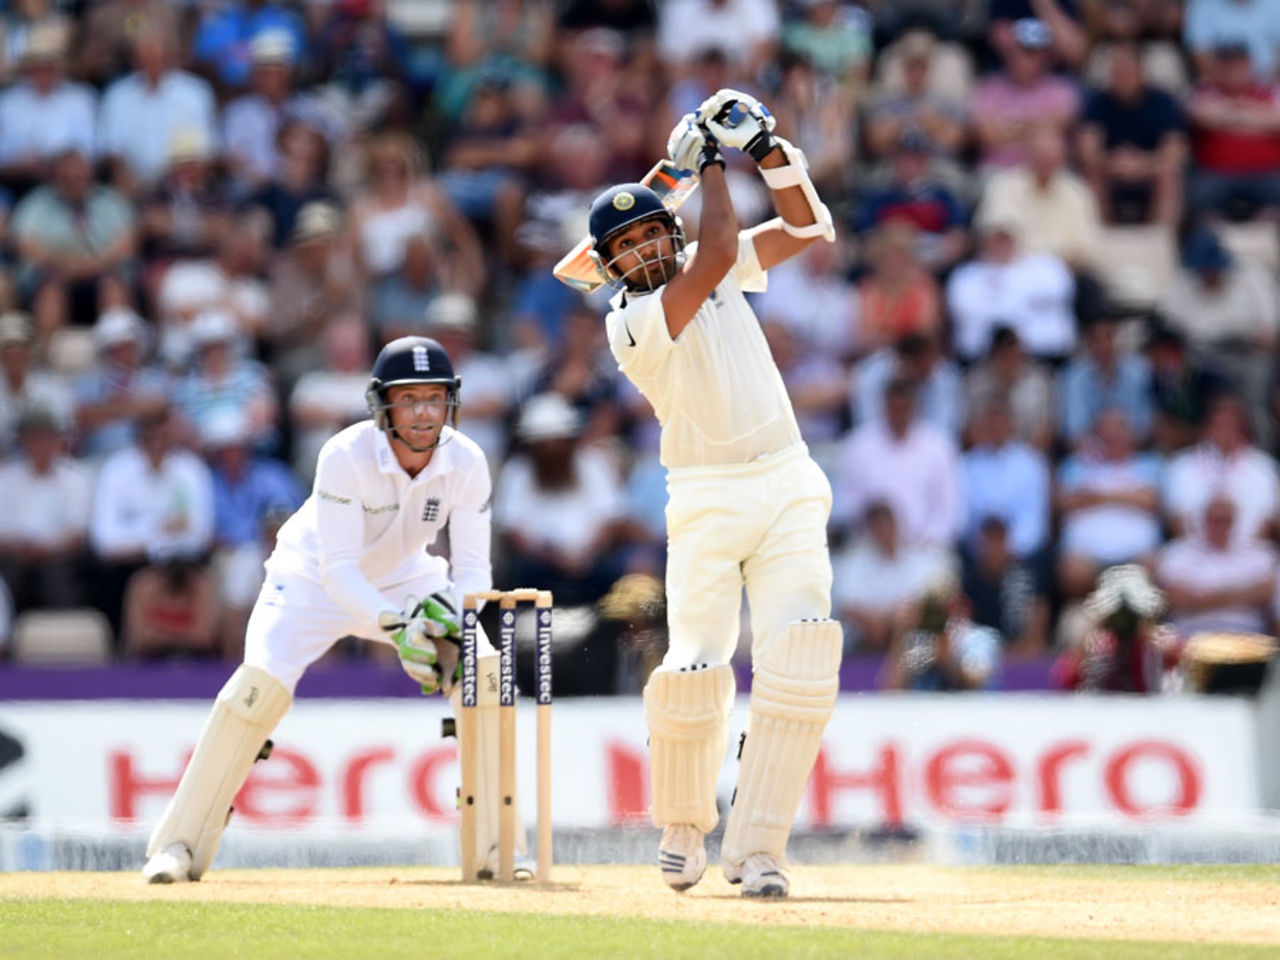 Rohit Sharma played some confident strokes, England v India, 3rd Investec Test, Ageas Bowl, 3rd day, July 29, 2014